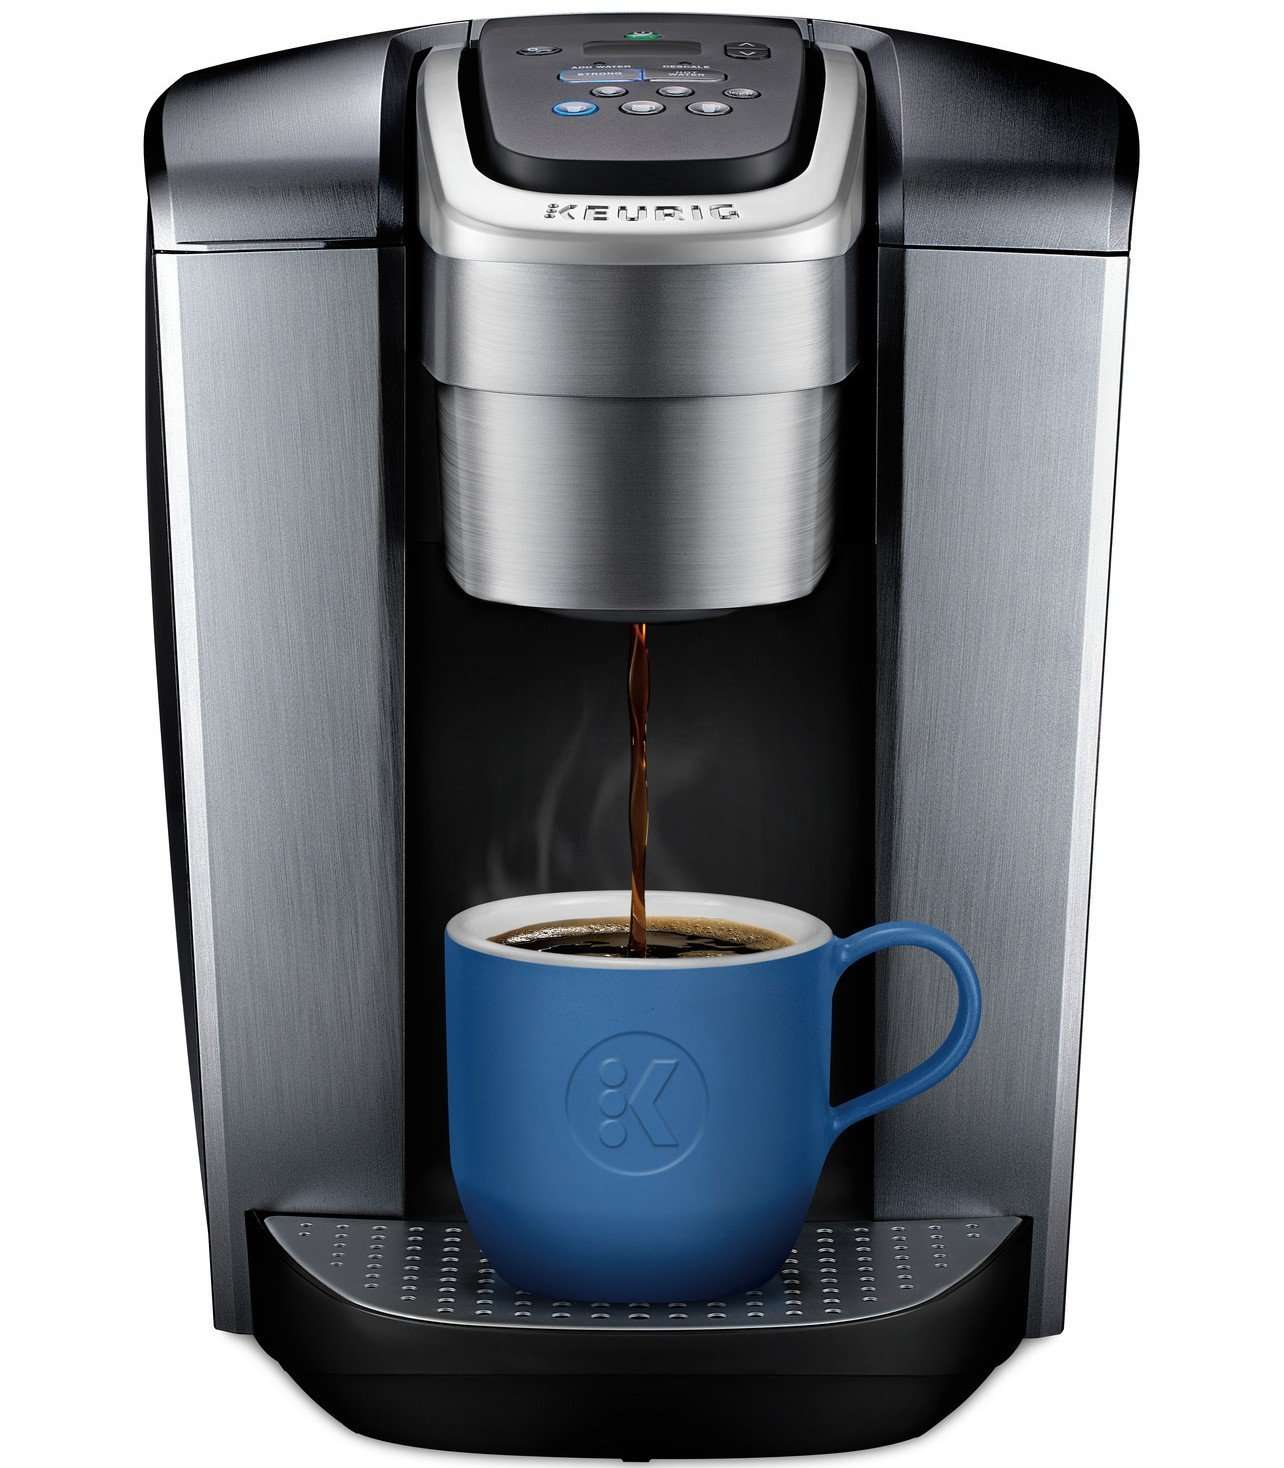 Bold design meets bold features in New Keurig K